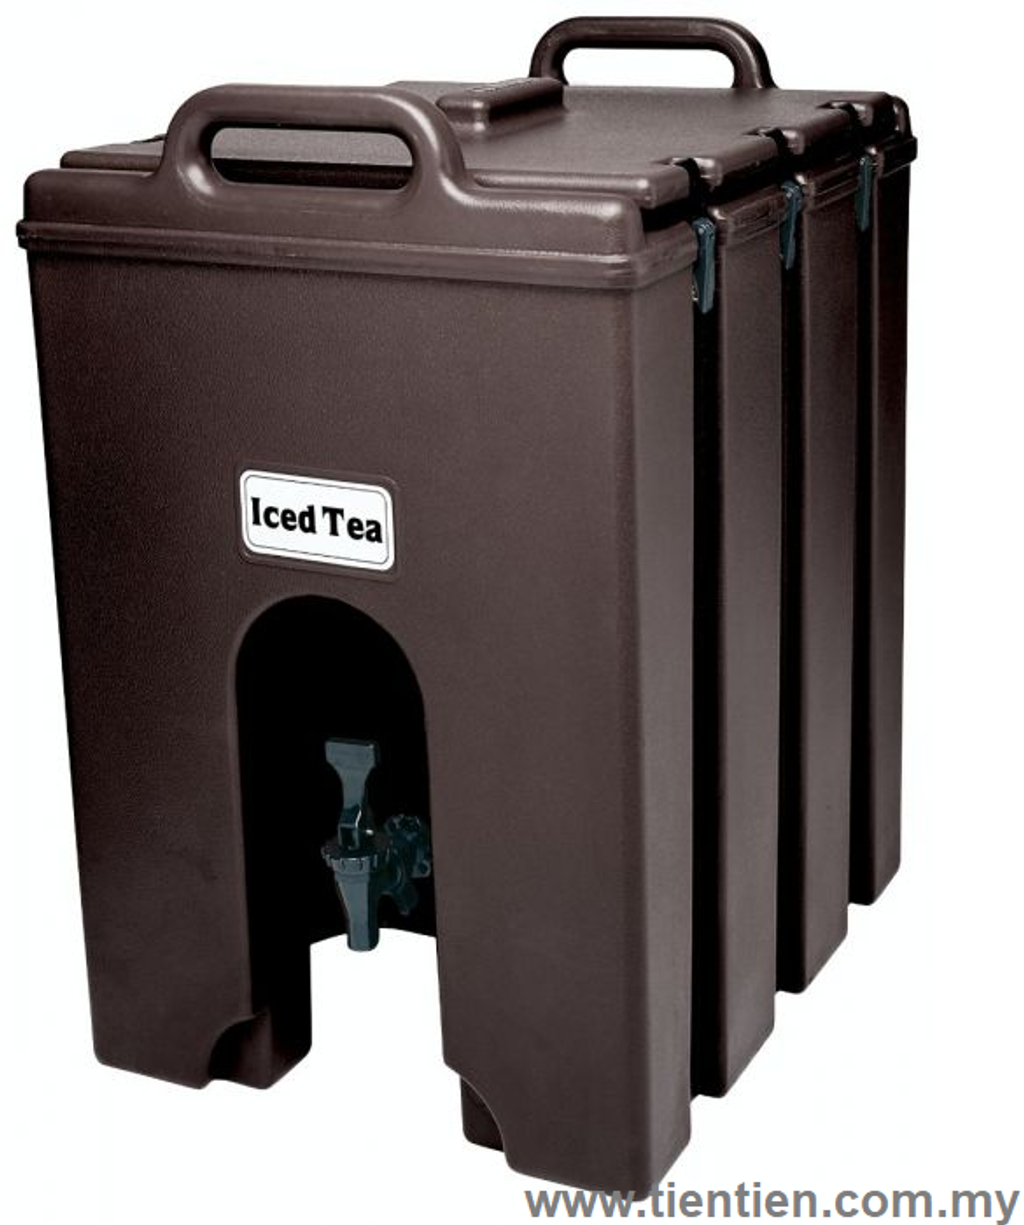 cambro-10-gallon-insulated-container-beverage-drinks-dispenser-dark-brown-tientien-malaysia.png